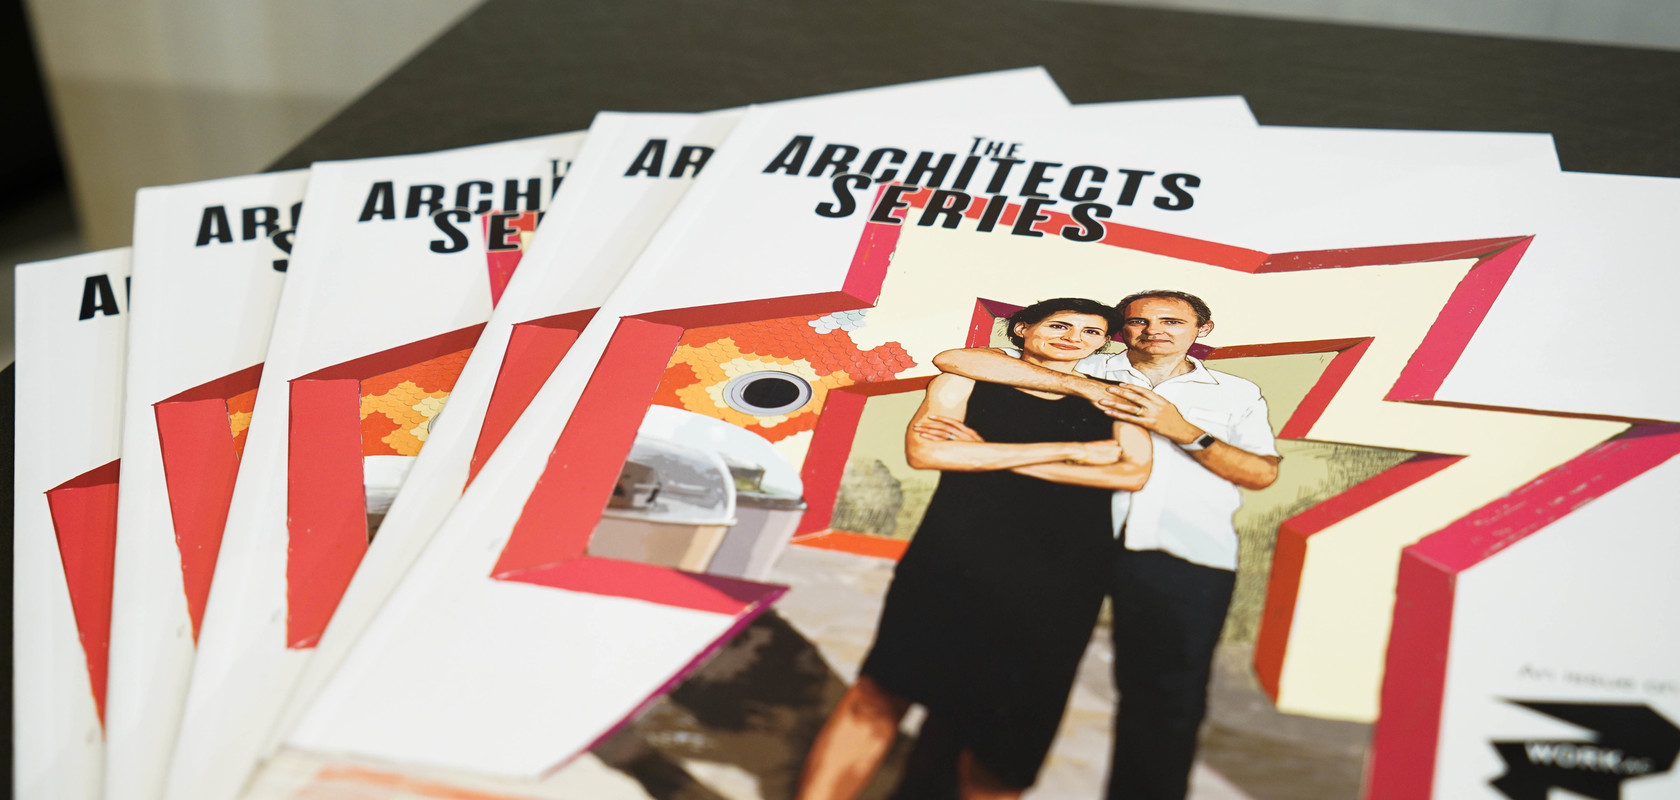 THE ARCHITECTS SERIES – A DOCUMENTARY ON: WORKAC